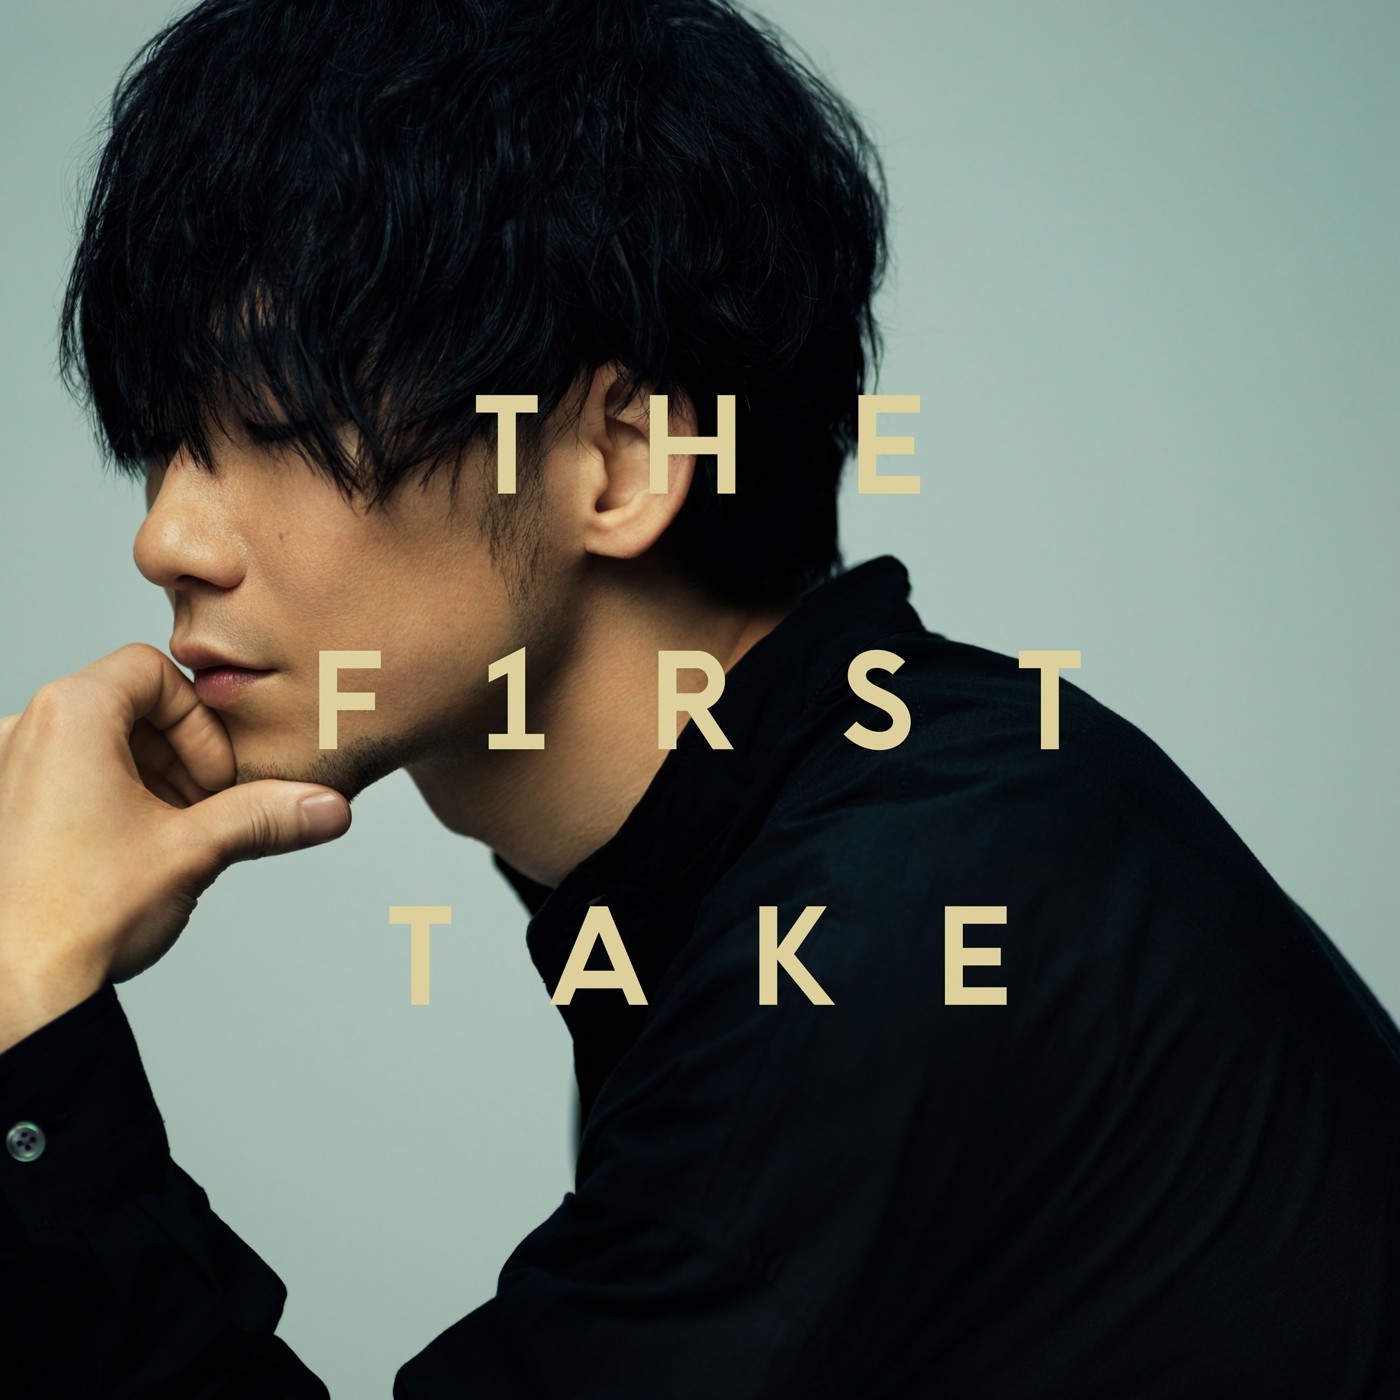 TK from 凛として時雨 - unravel – From THE FIRST TAKE [FLAC 24bit/96kHz]